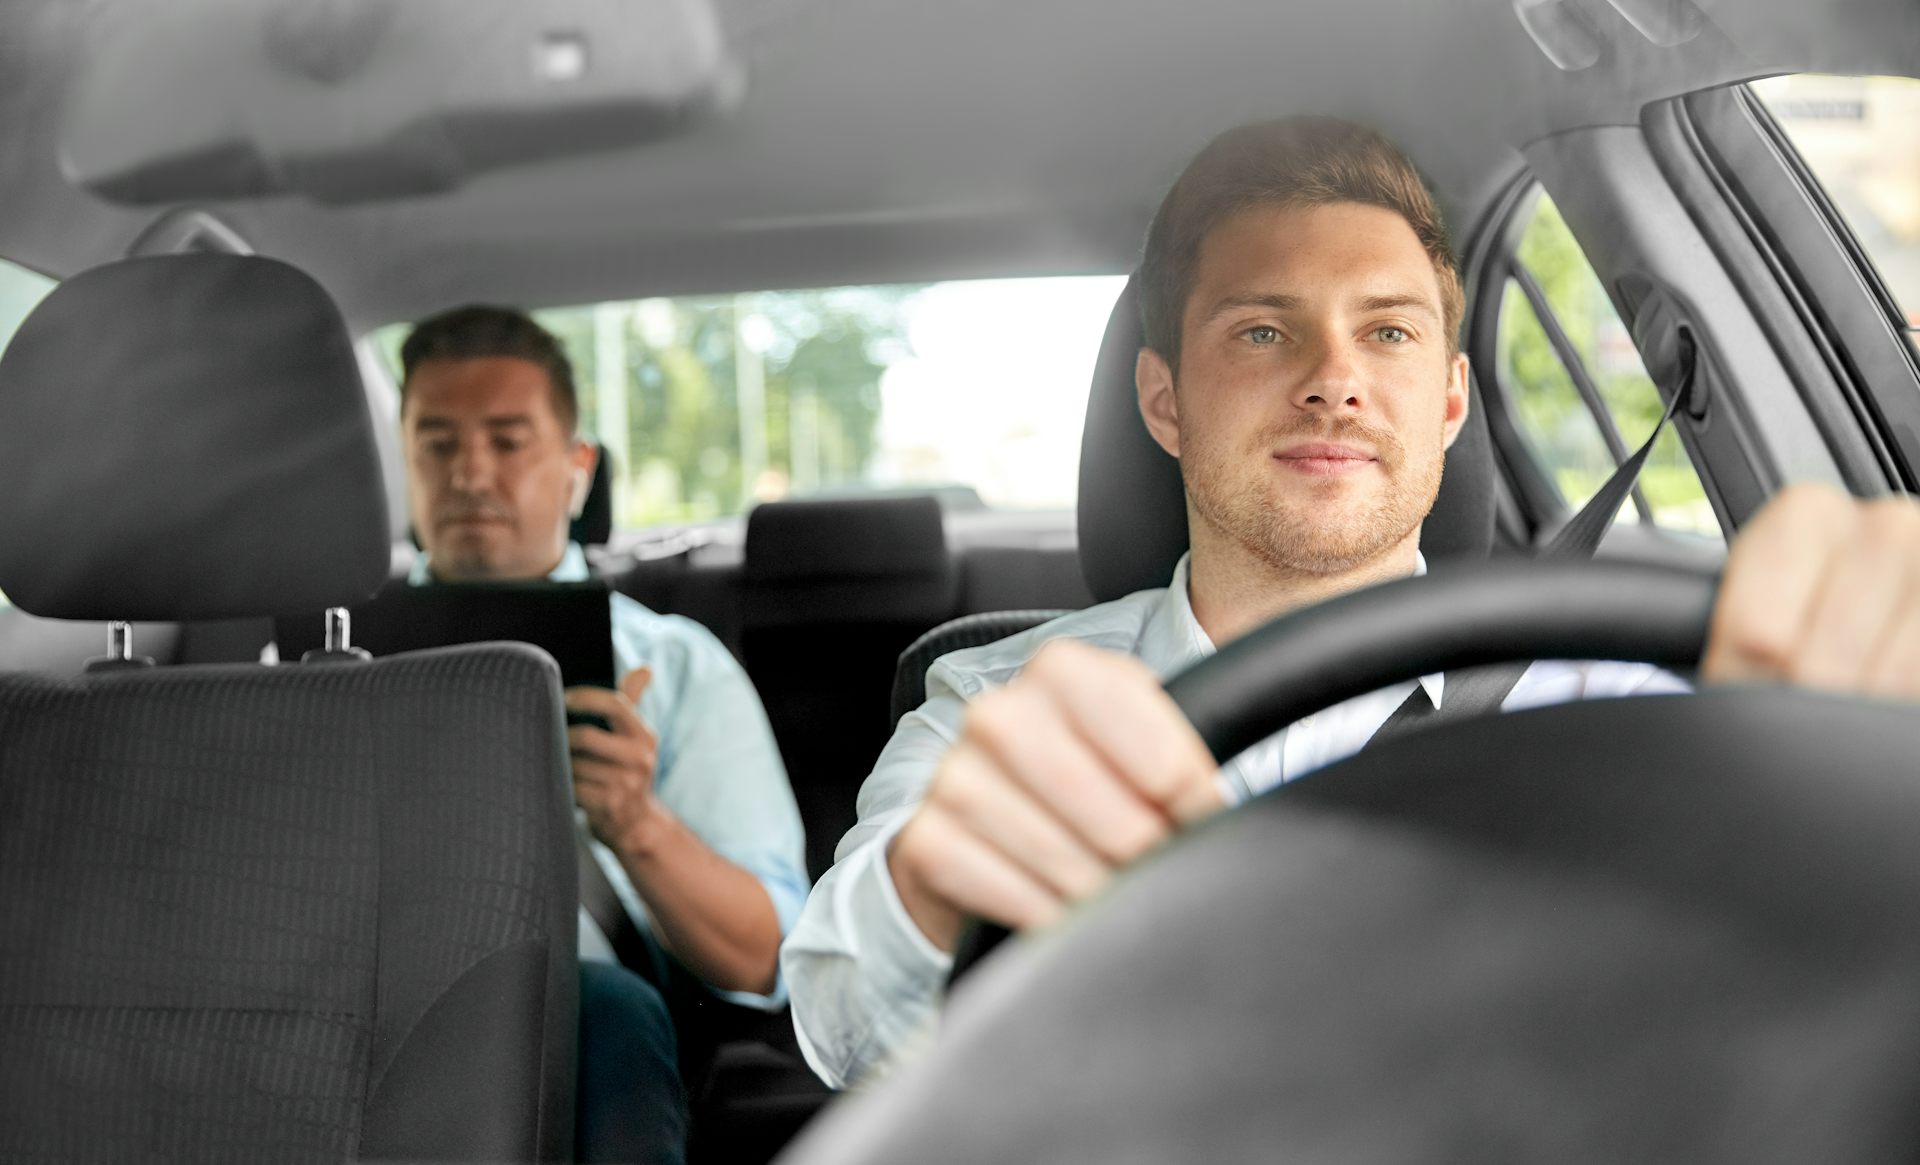 Uber portrayed its drivers as part-time workers who made a good income. (Shutterstock)